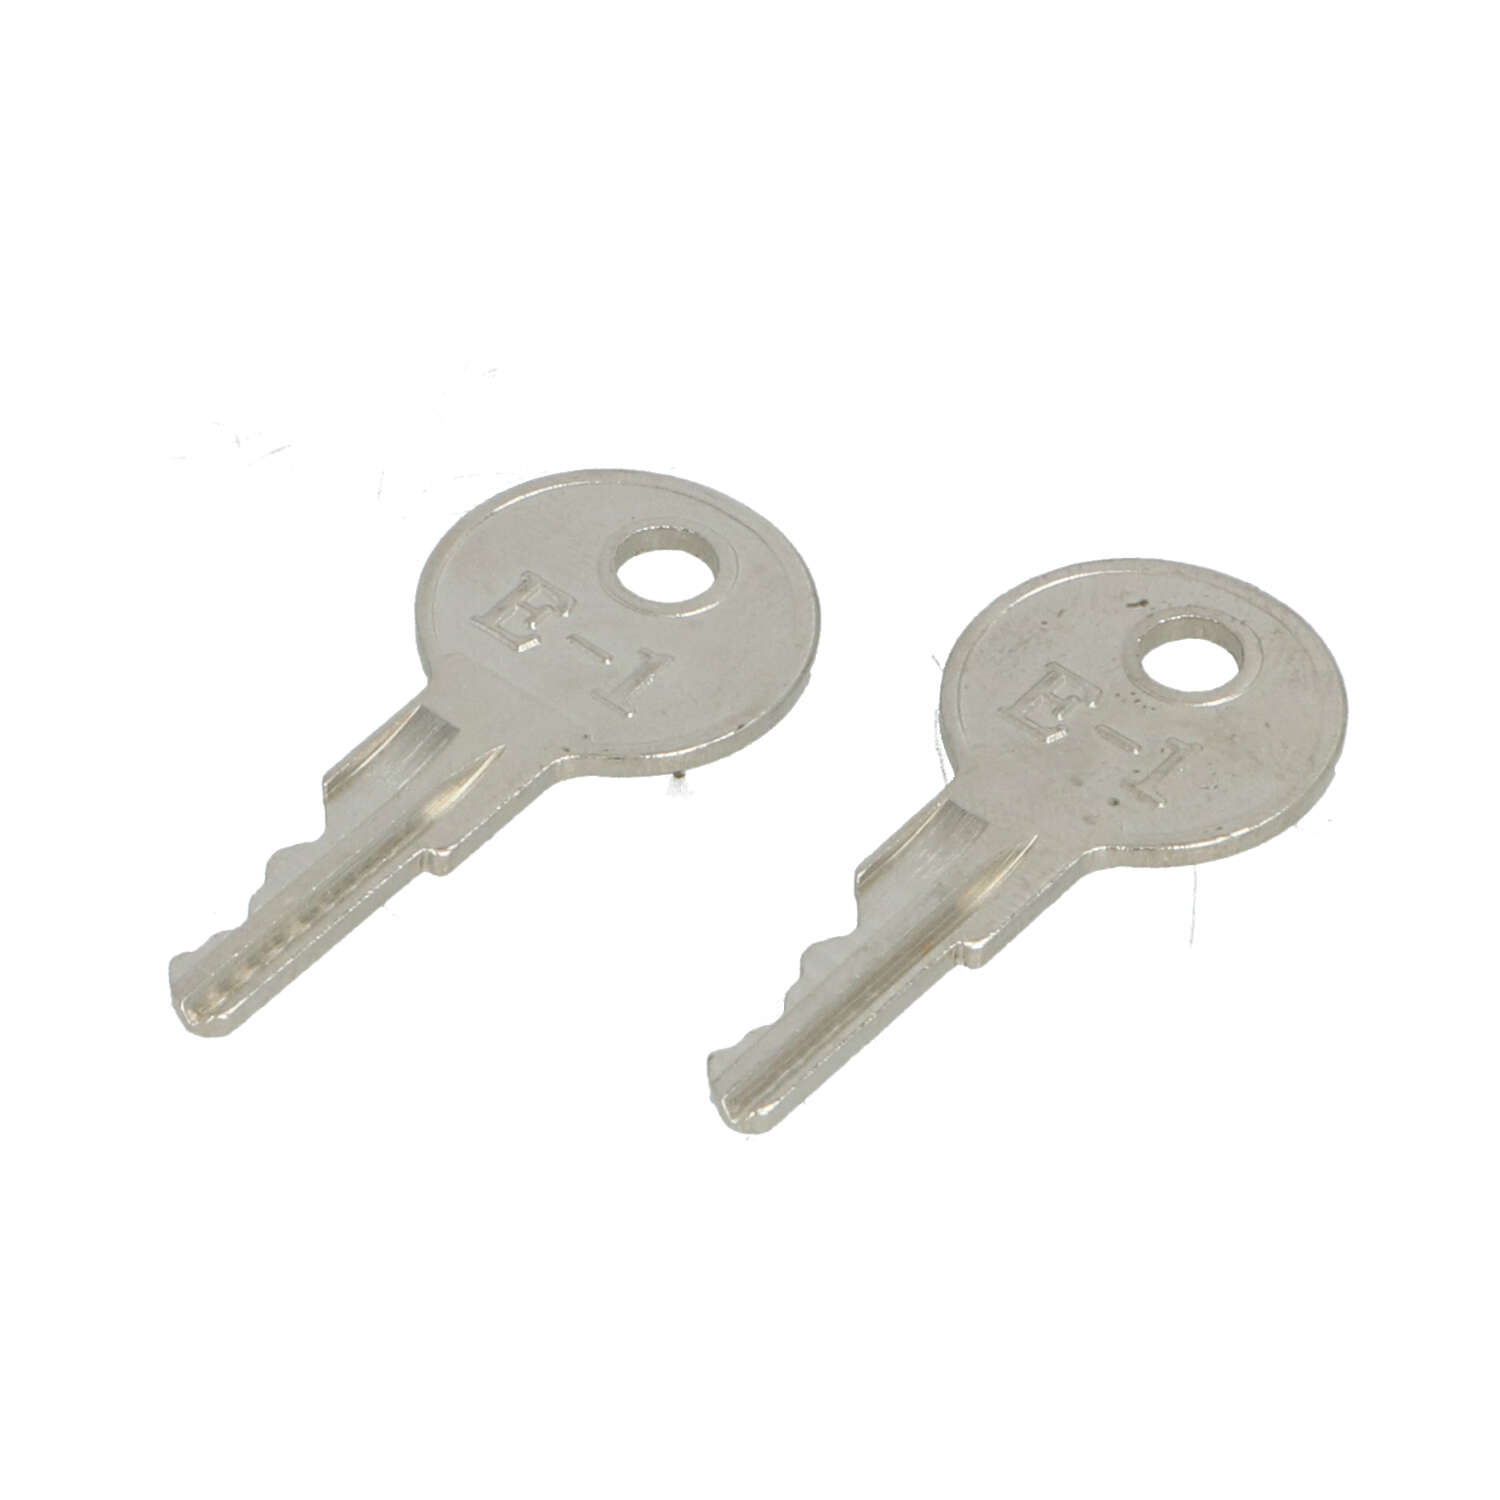 REPLACEMENT KEY (SET OF 2 PIECES)